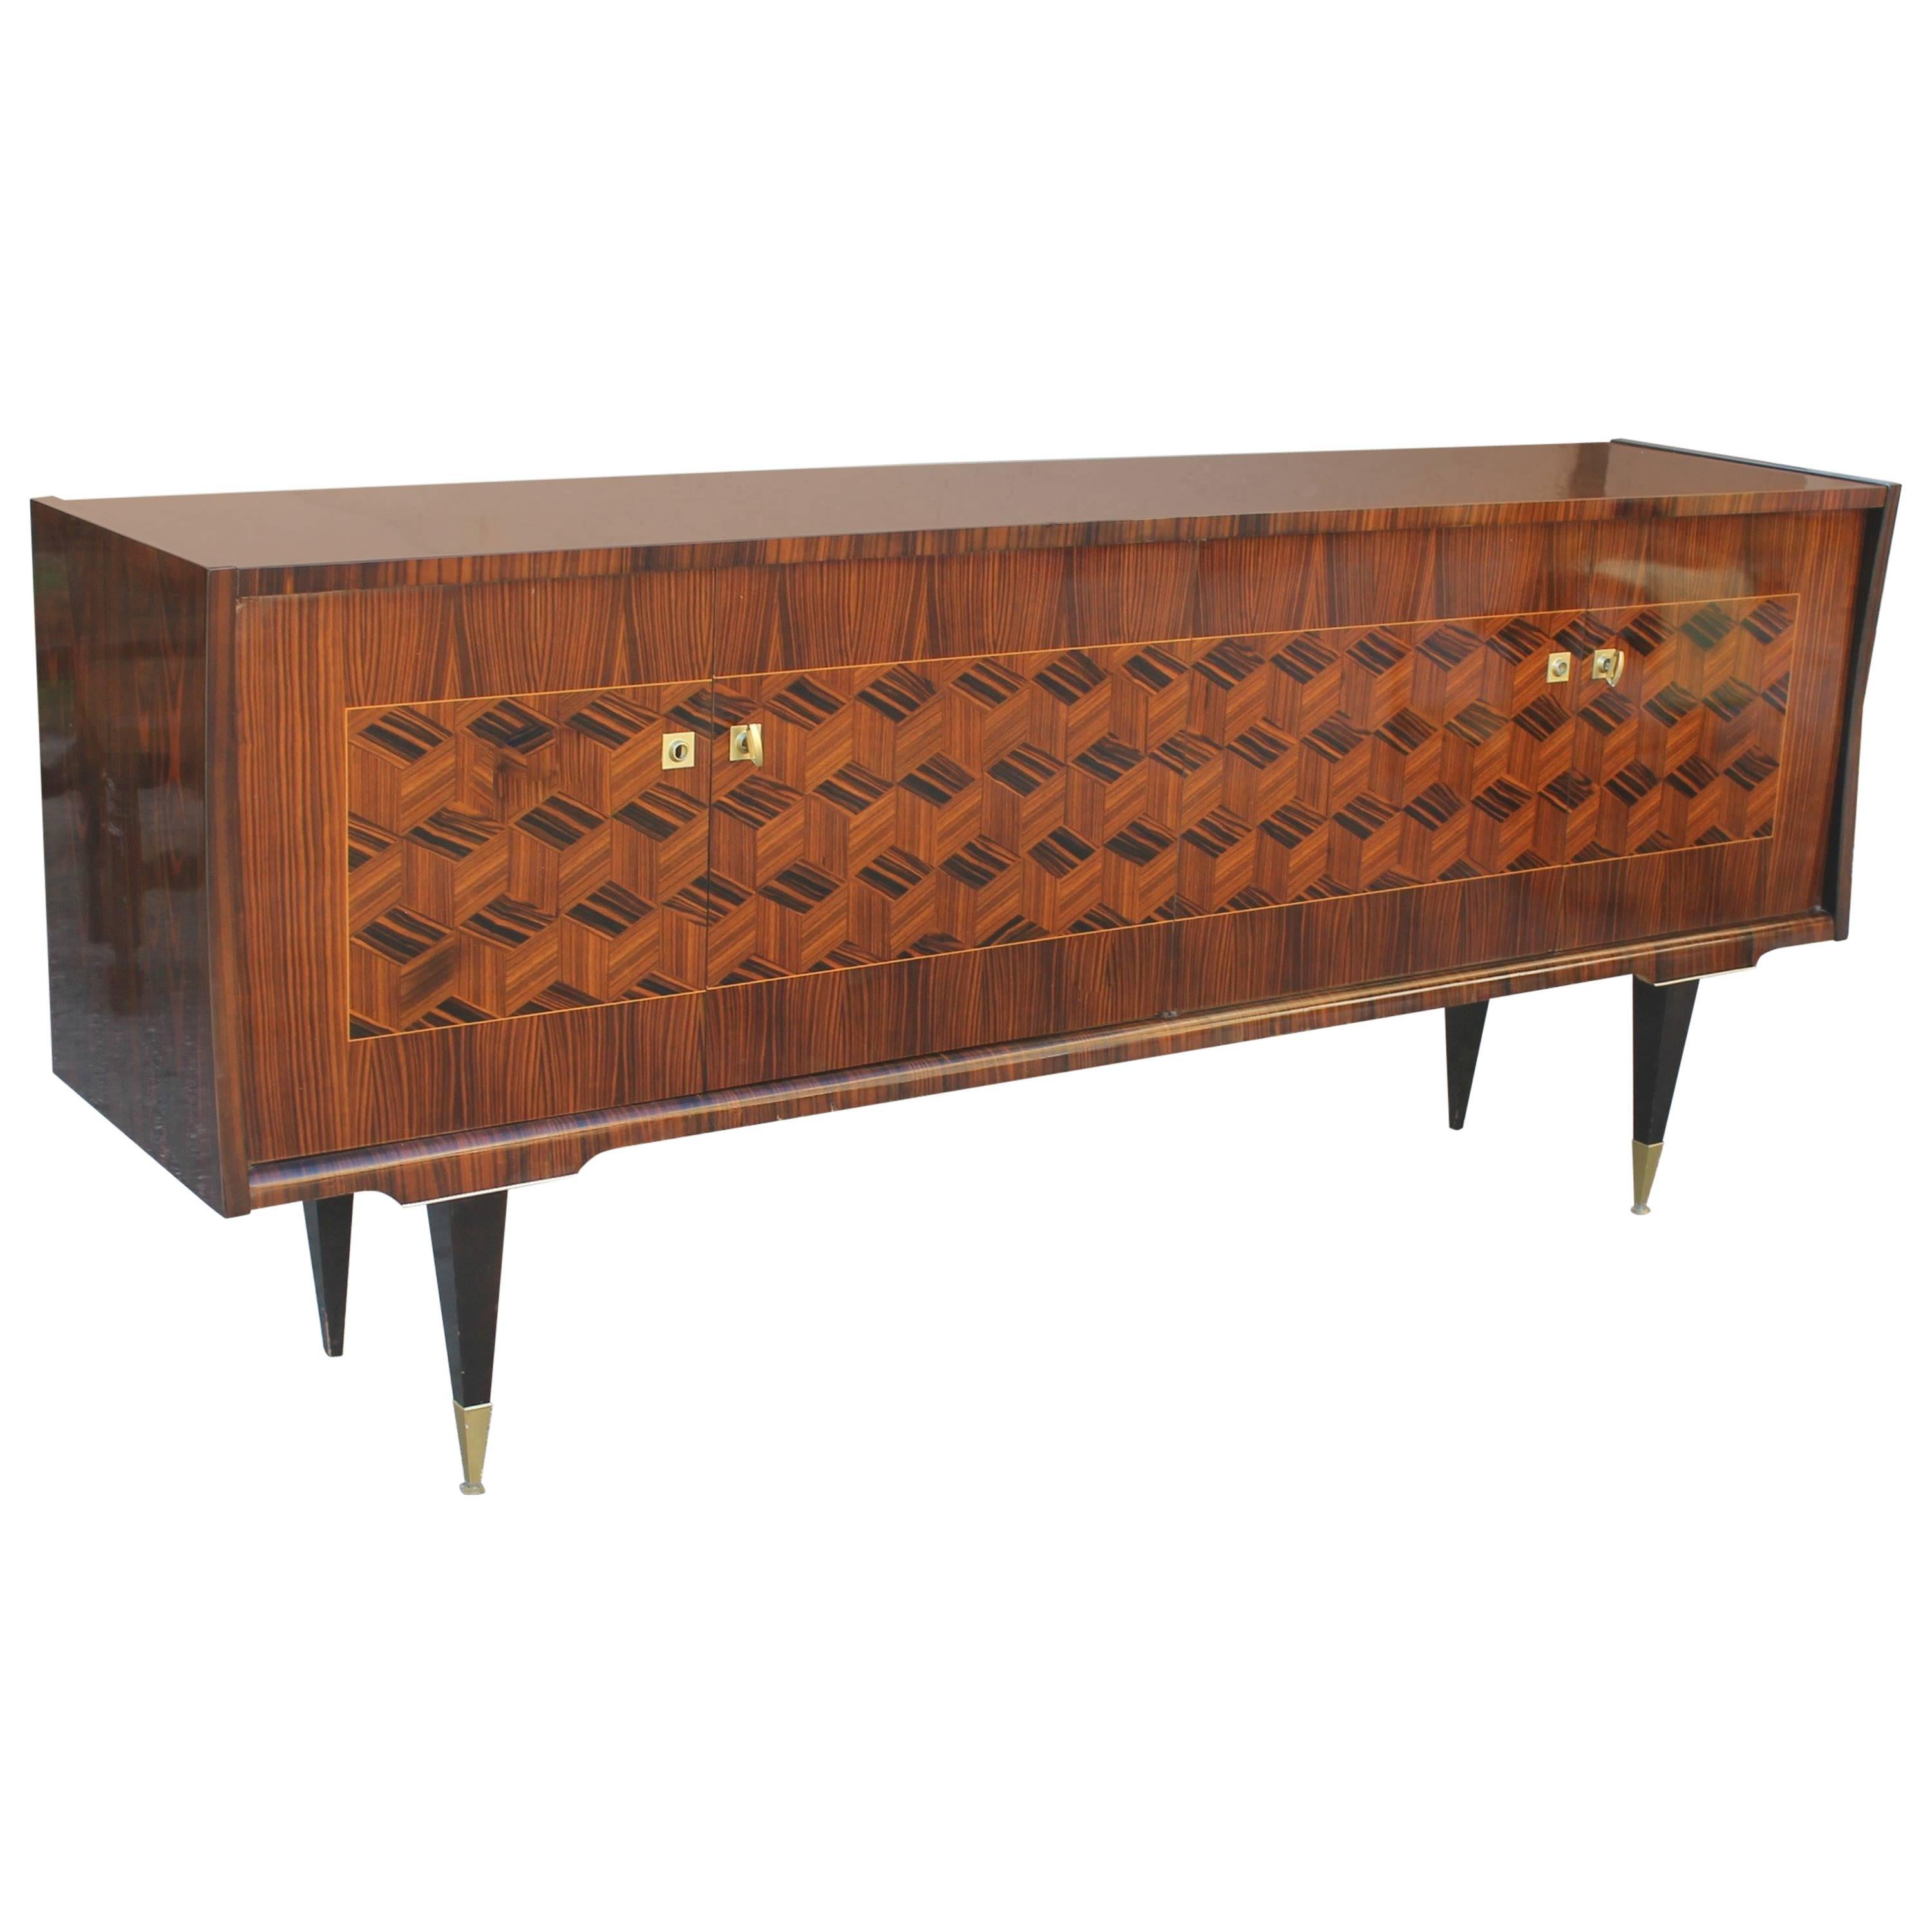 French Art Deco Exotic Macassar Marquetry Sideboard / Buffet / Bar, circa 1940s